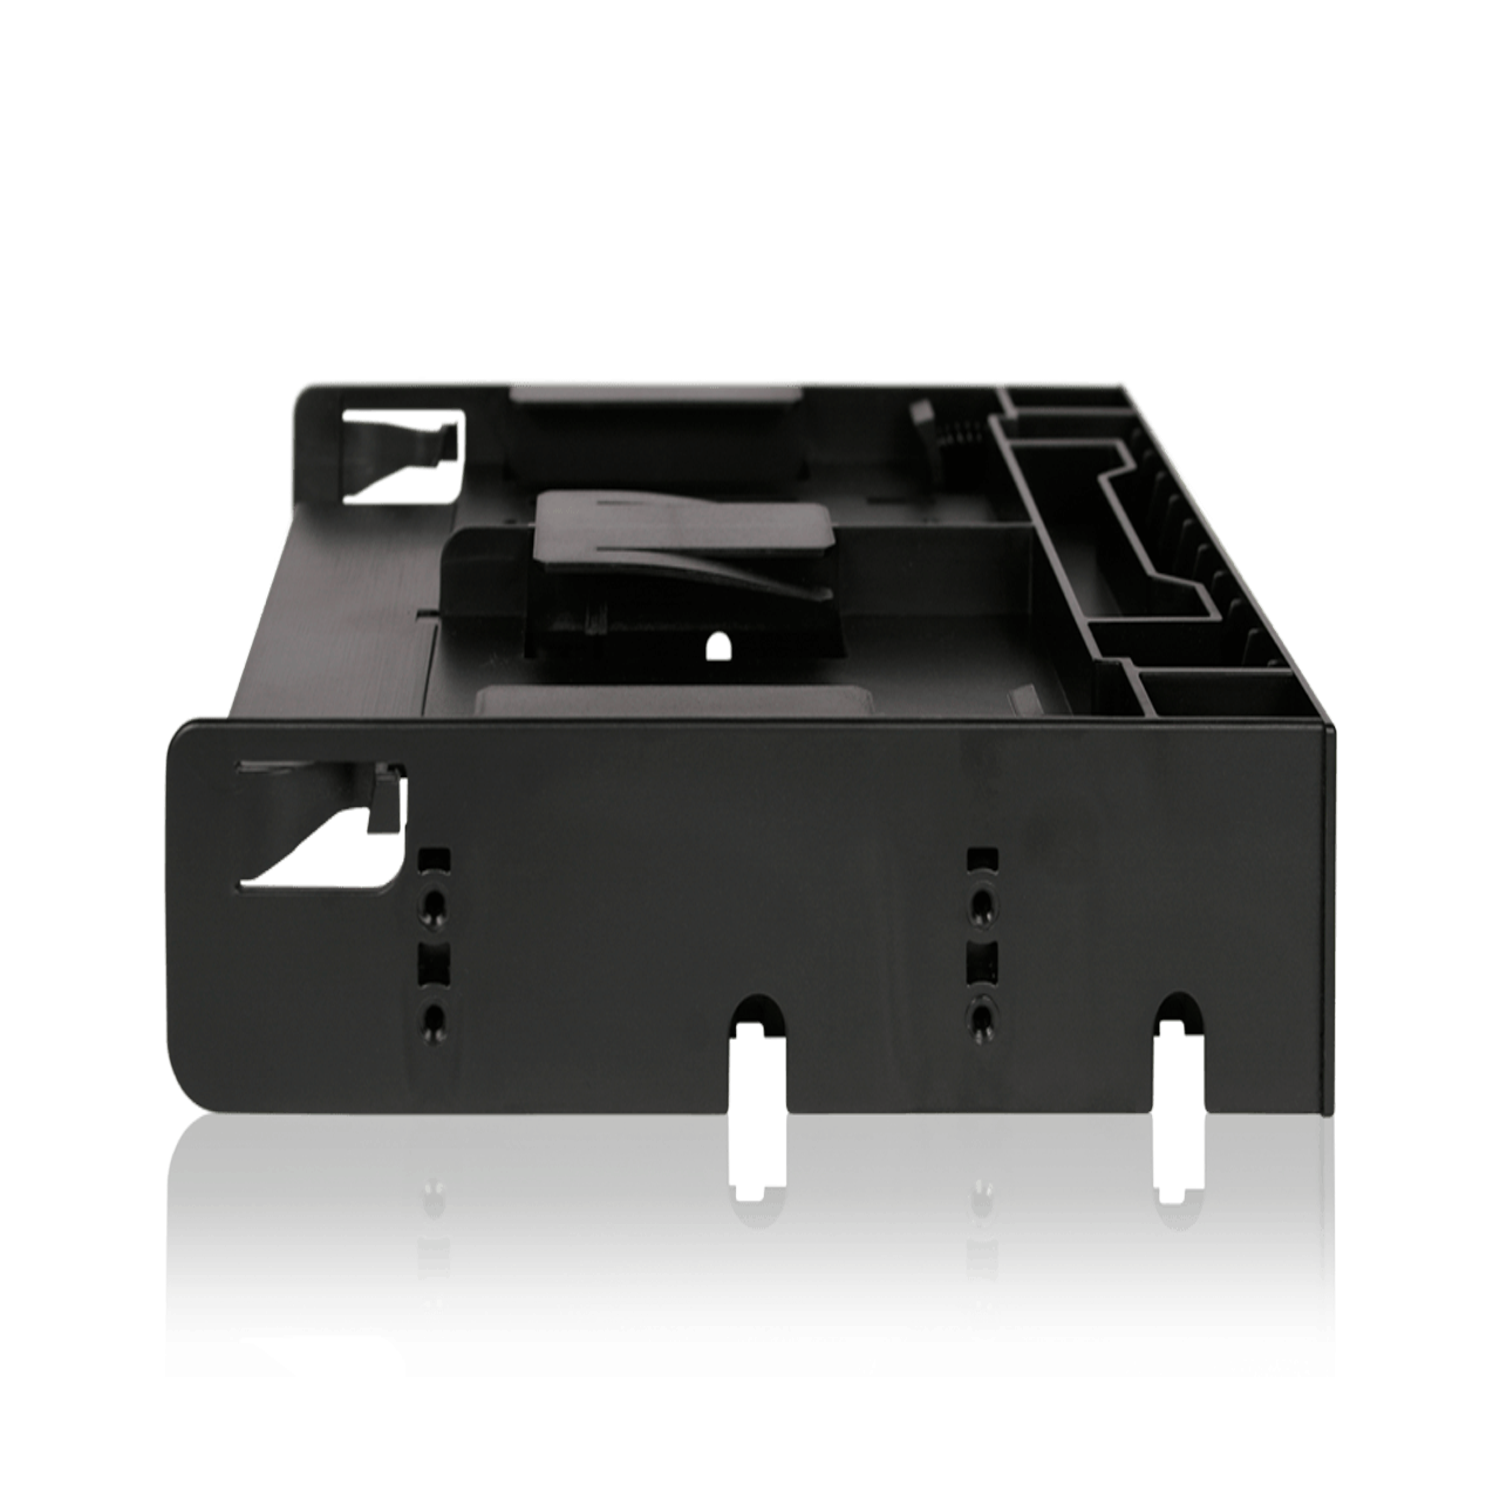 Dual 2.5" HDD/SSD & One 3.5" HDD/Device Front Bay to External 5.25" Bay Converter/ Mounting Kit